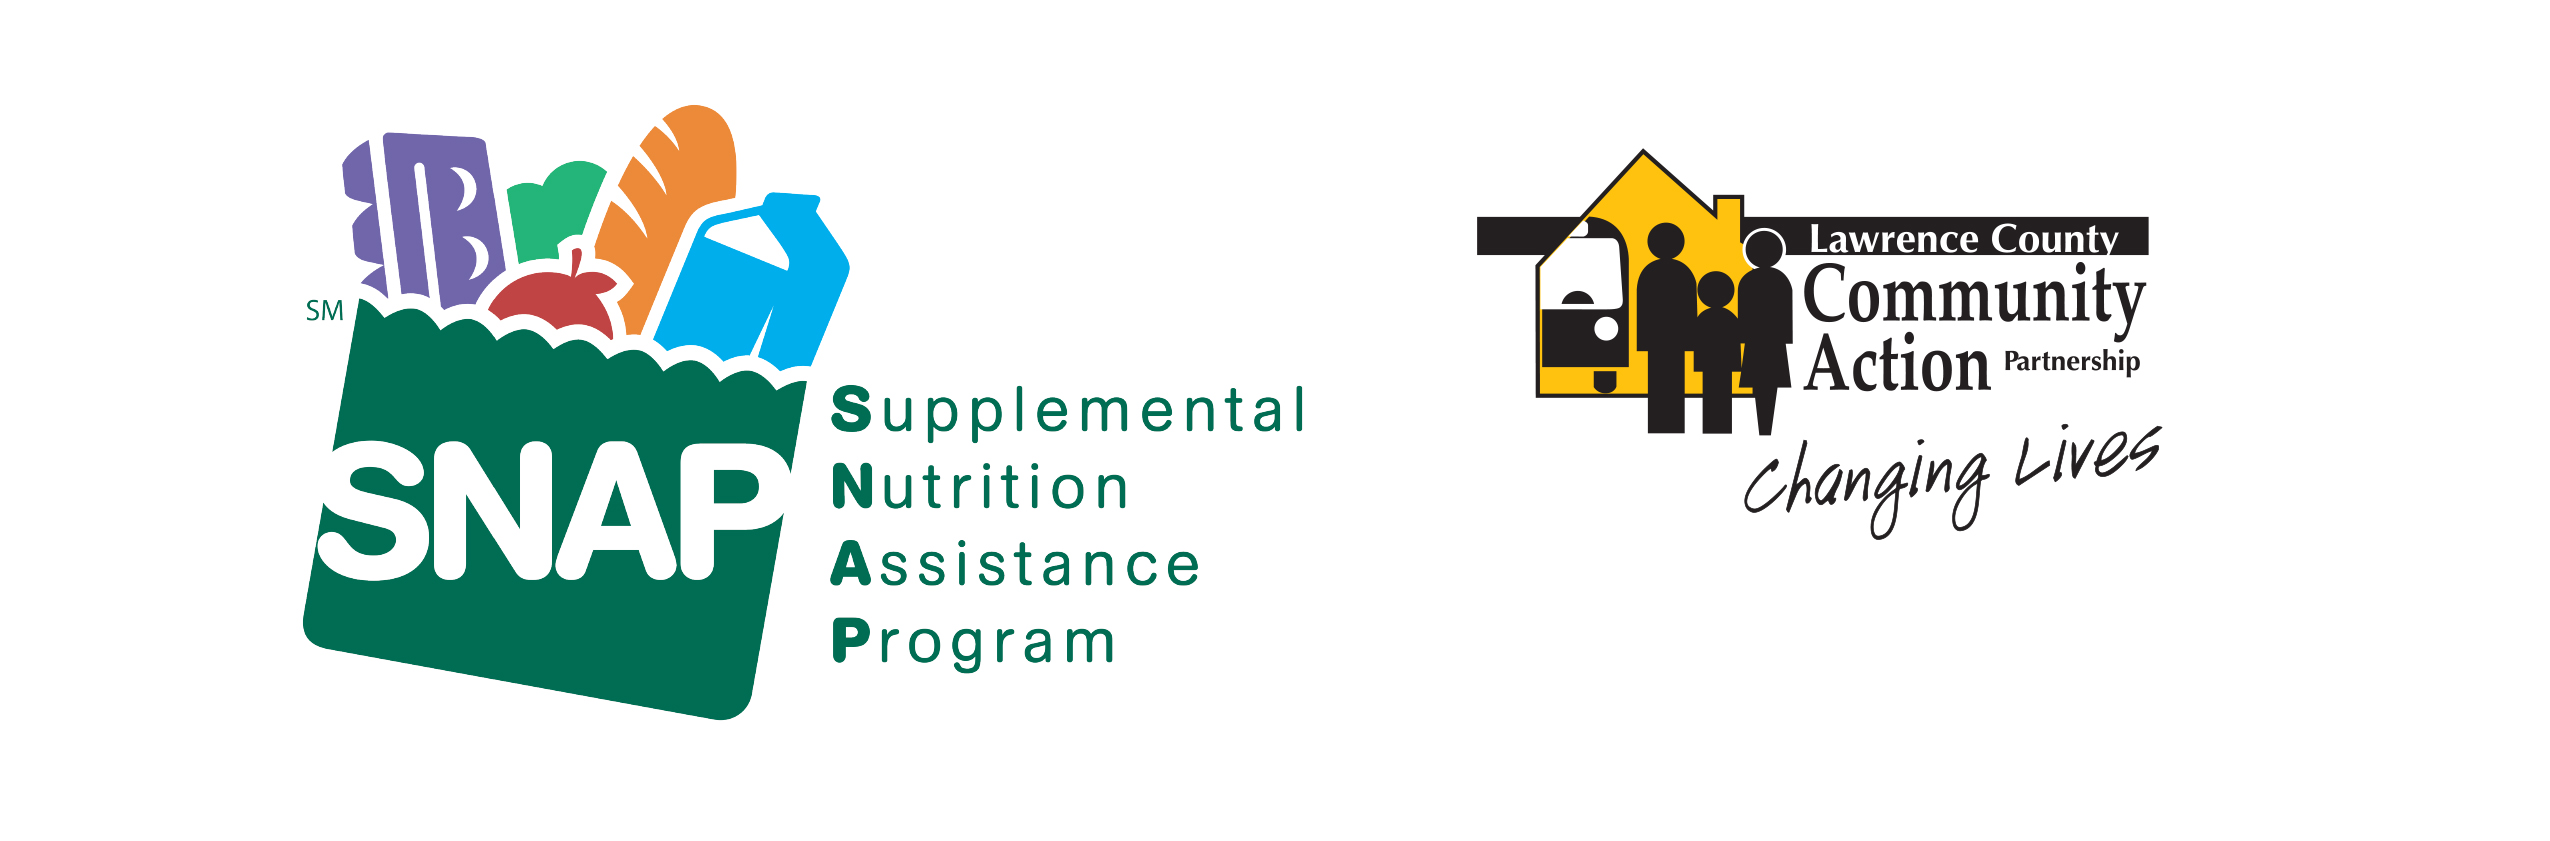 Supplemental Nutrition Assistance Program (SNAP) Lawrence County